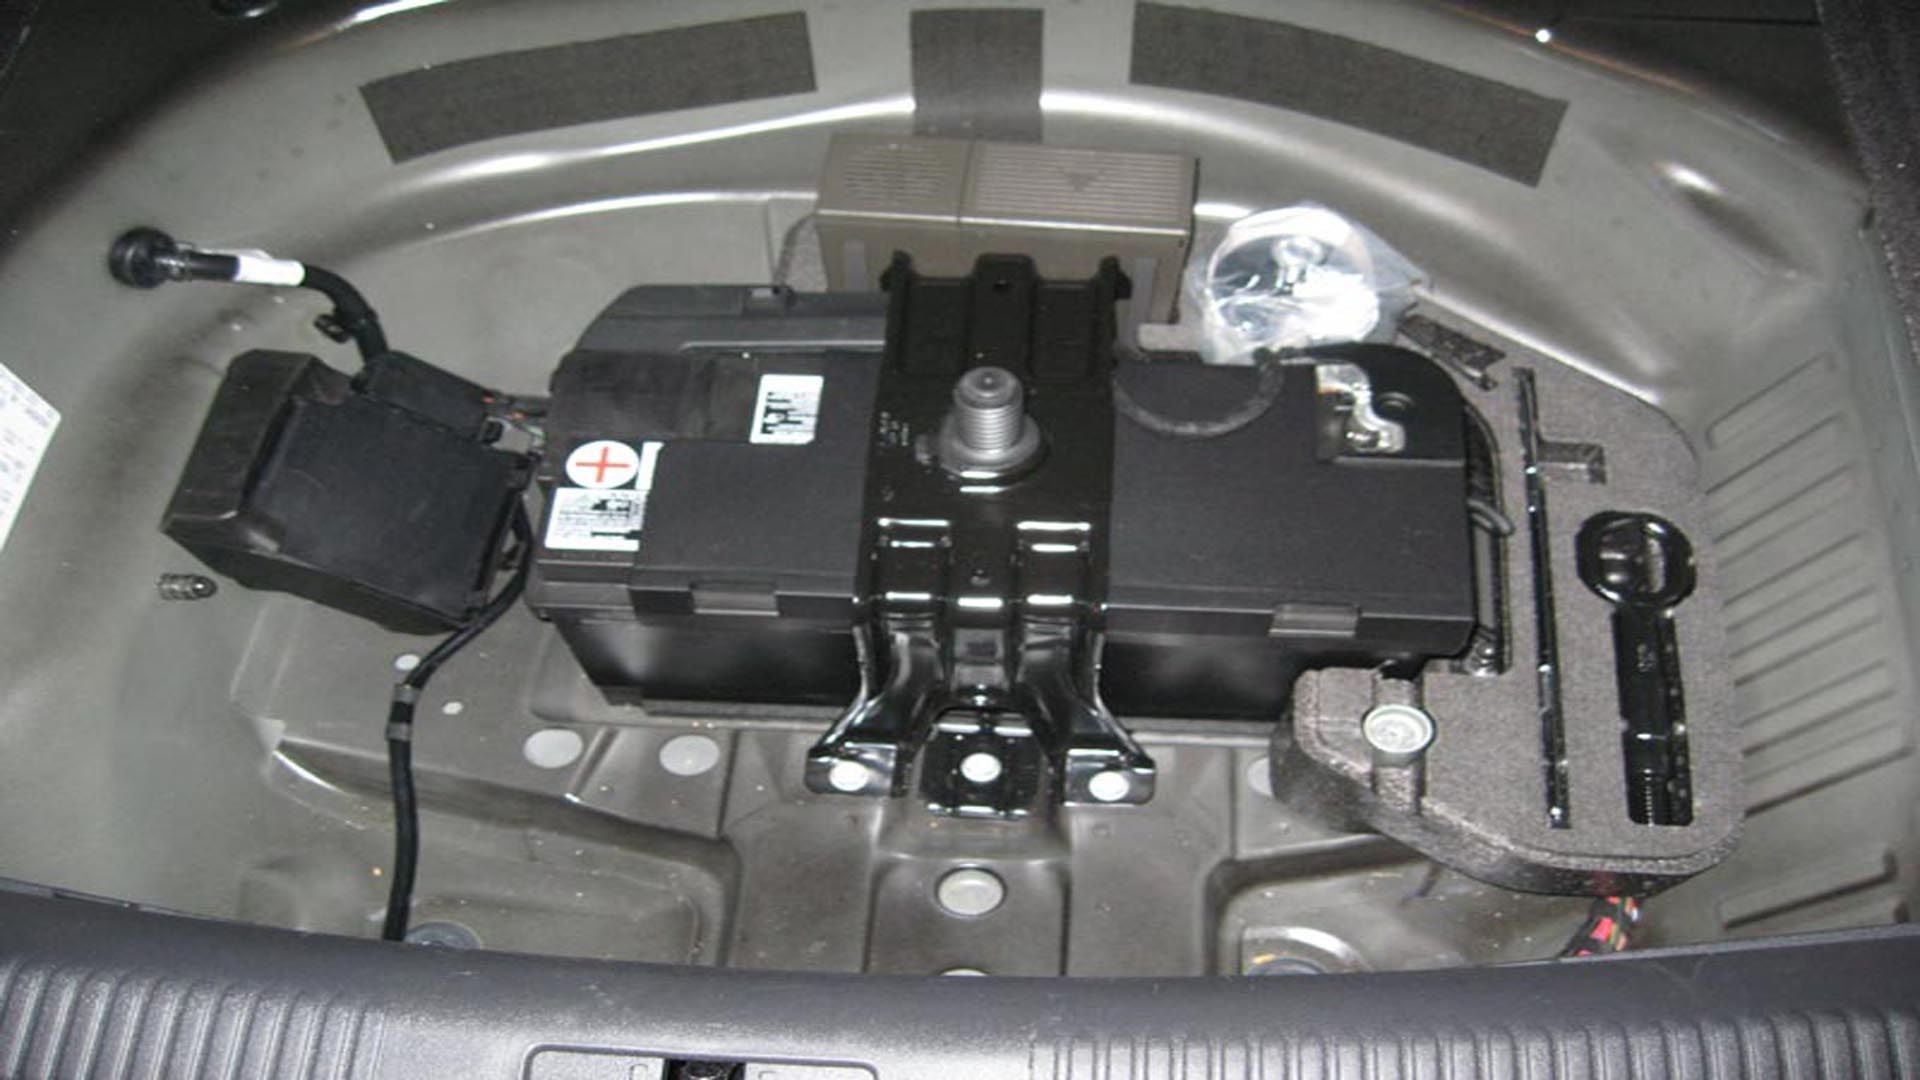 Where is the Battery in an Audi A4 